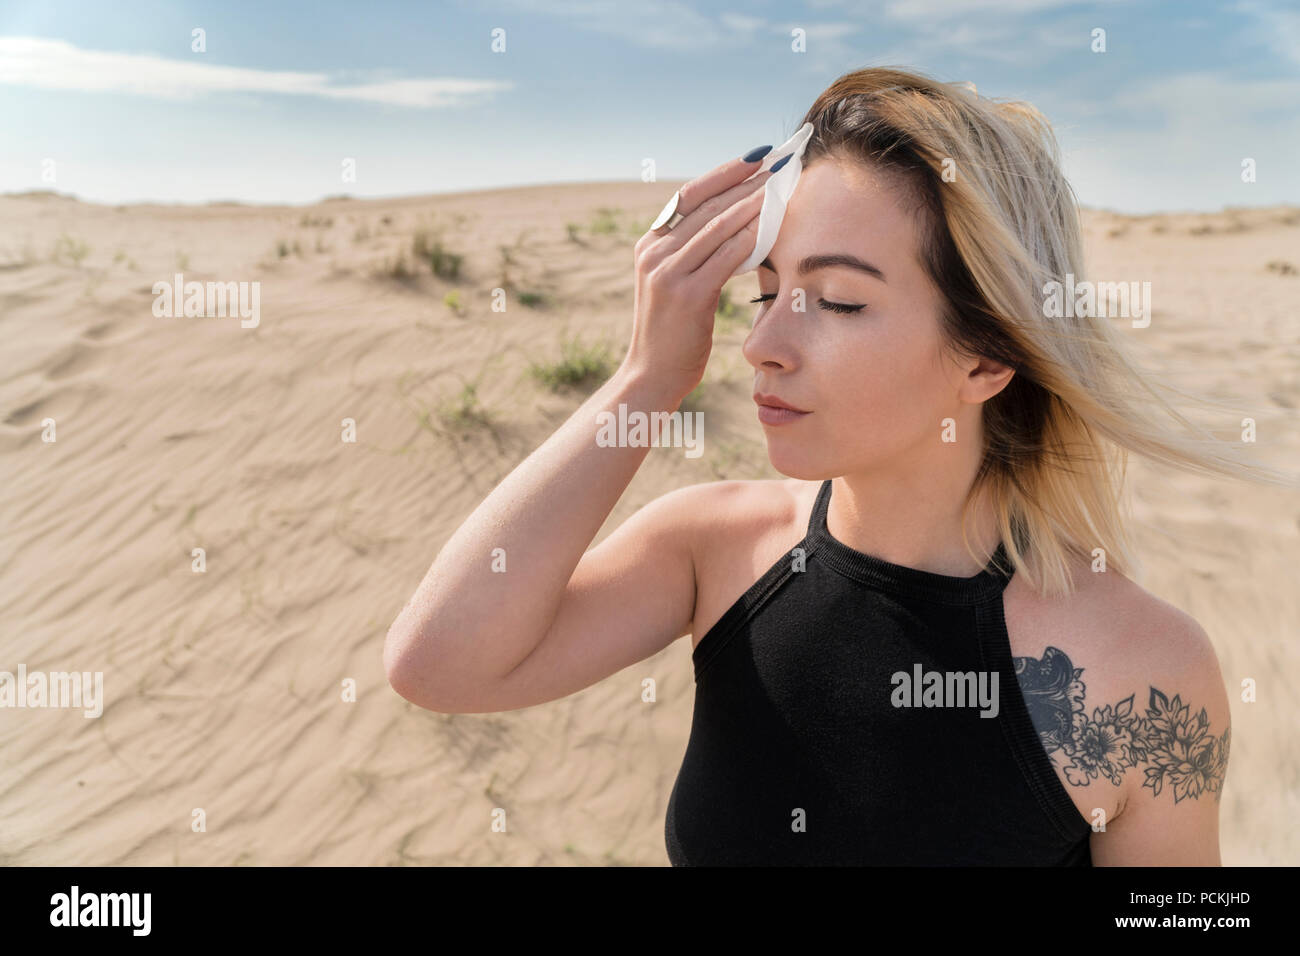 Portrait of a woman on a sunny day in the desert, wiping the sweat from her forehead with a handkerchief Stock Photo